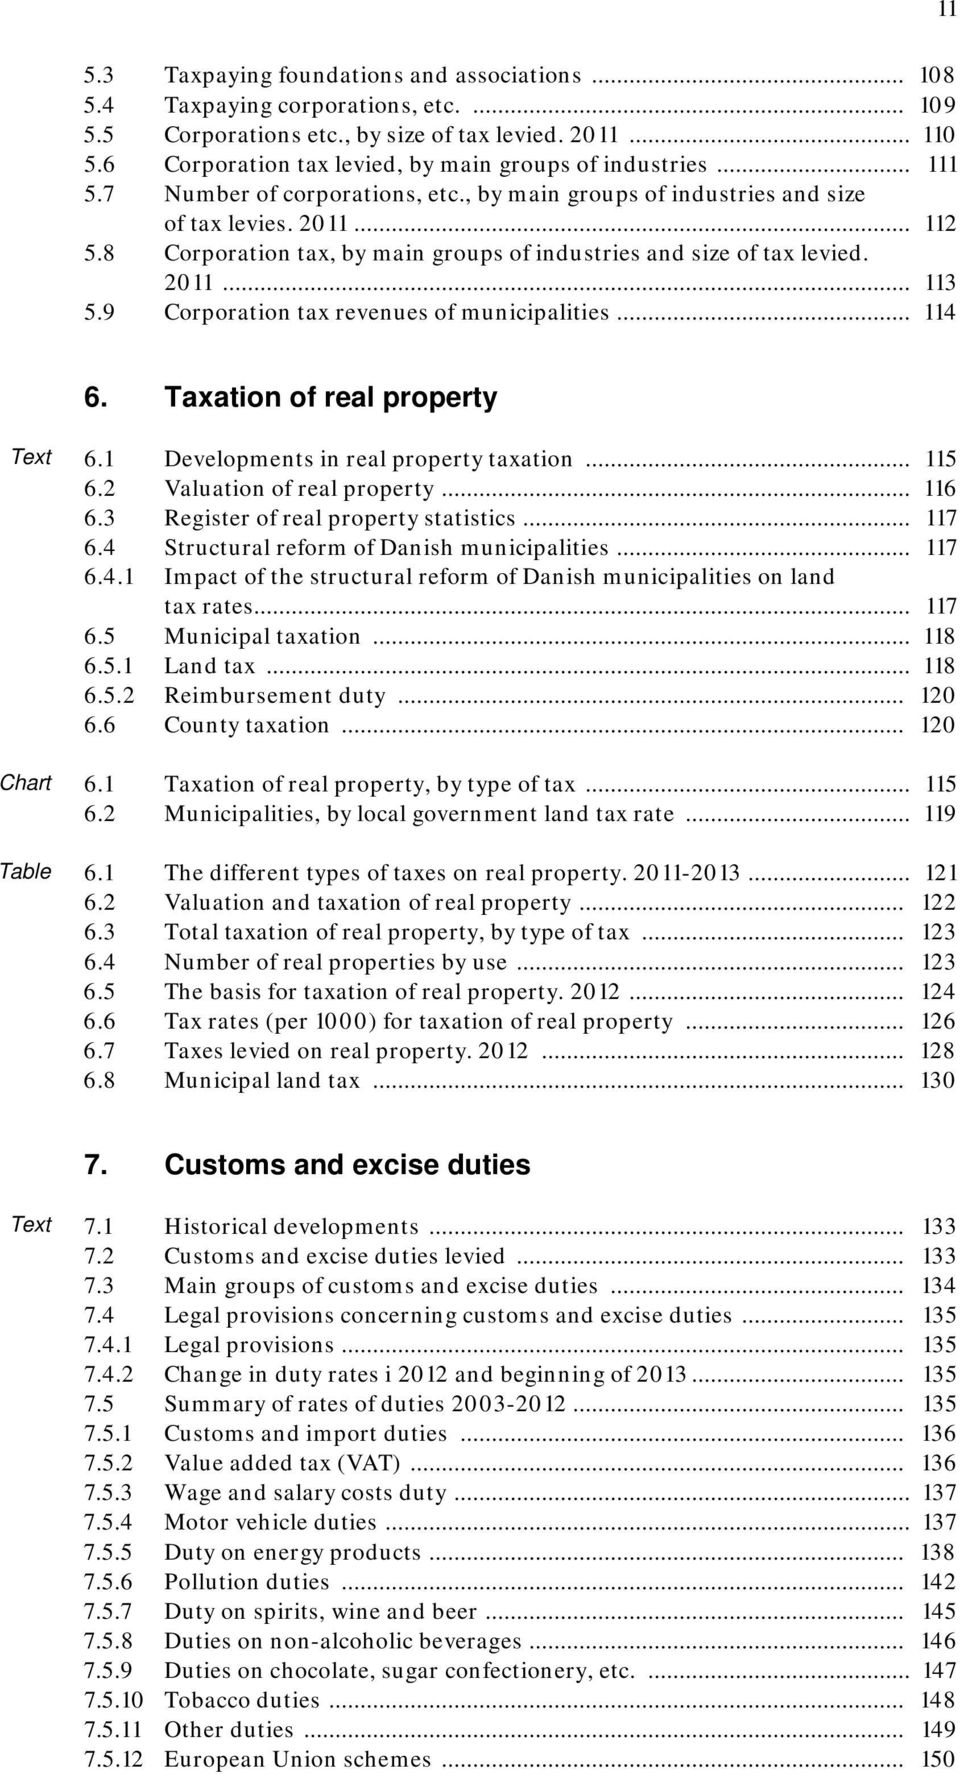 8 Corporation tax, by main groups of industries and size of tax levied. 2011... 113 5.9 Corporation tax revenues of municipalities... 114 6. Taxation of real property Text Chart Table 6.